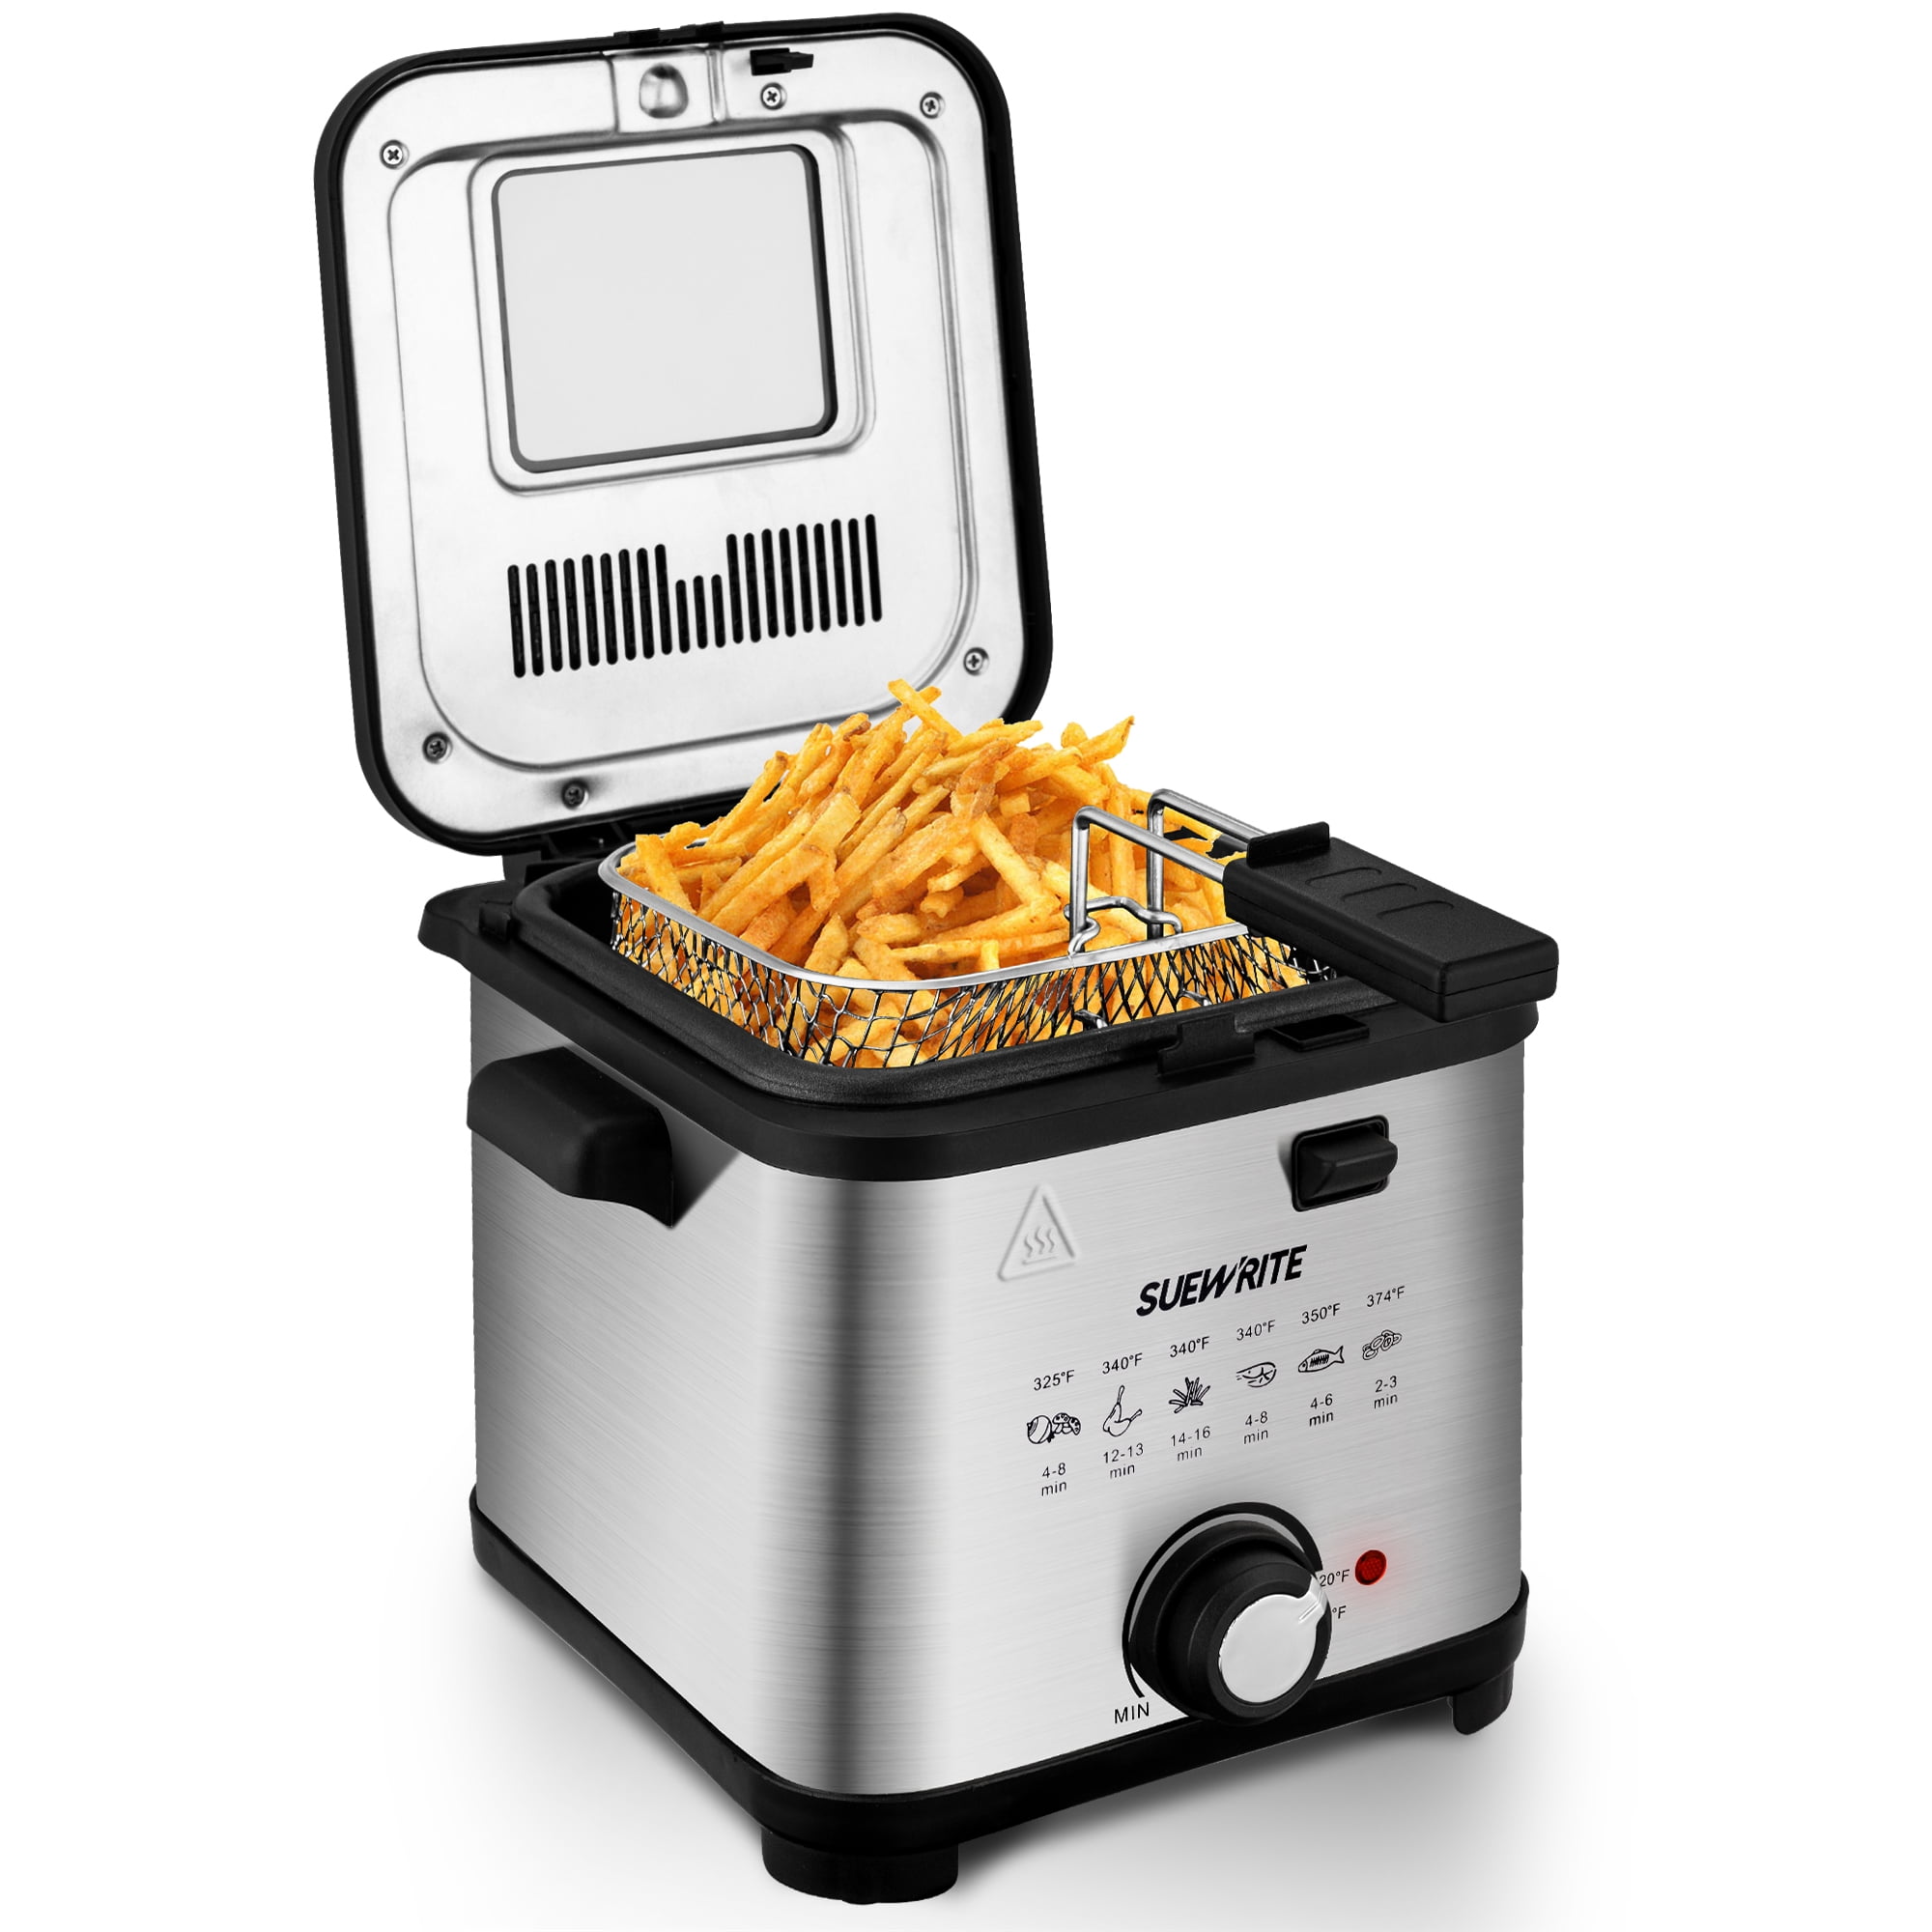 ARLIME Deep Fryer with Basket, 3.2 Qt/3L Electric Fryer with Adjustable Temperature & Timer, Removable Oil-Container & Lid w/View Window, Stainless